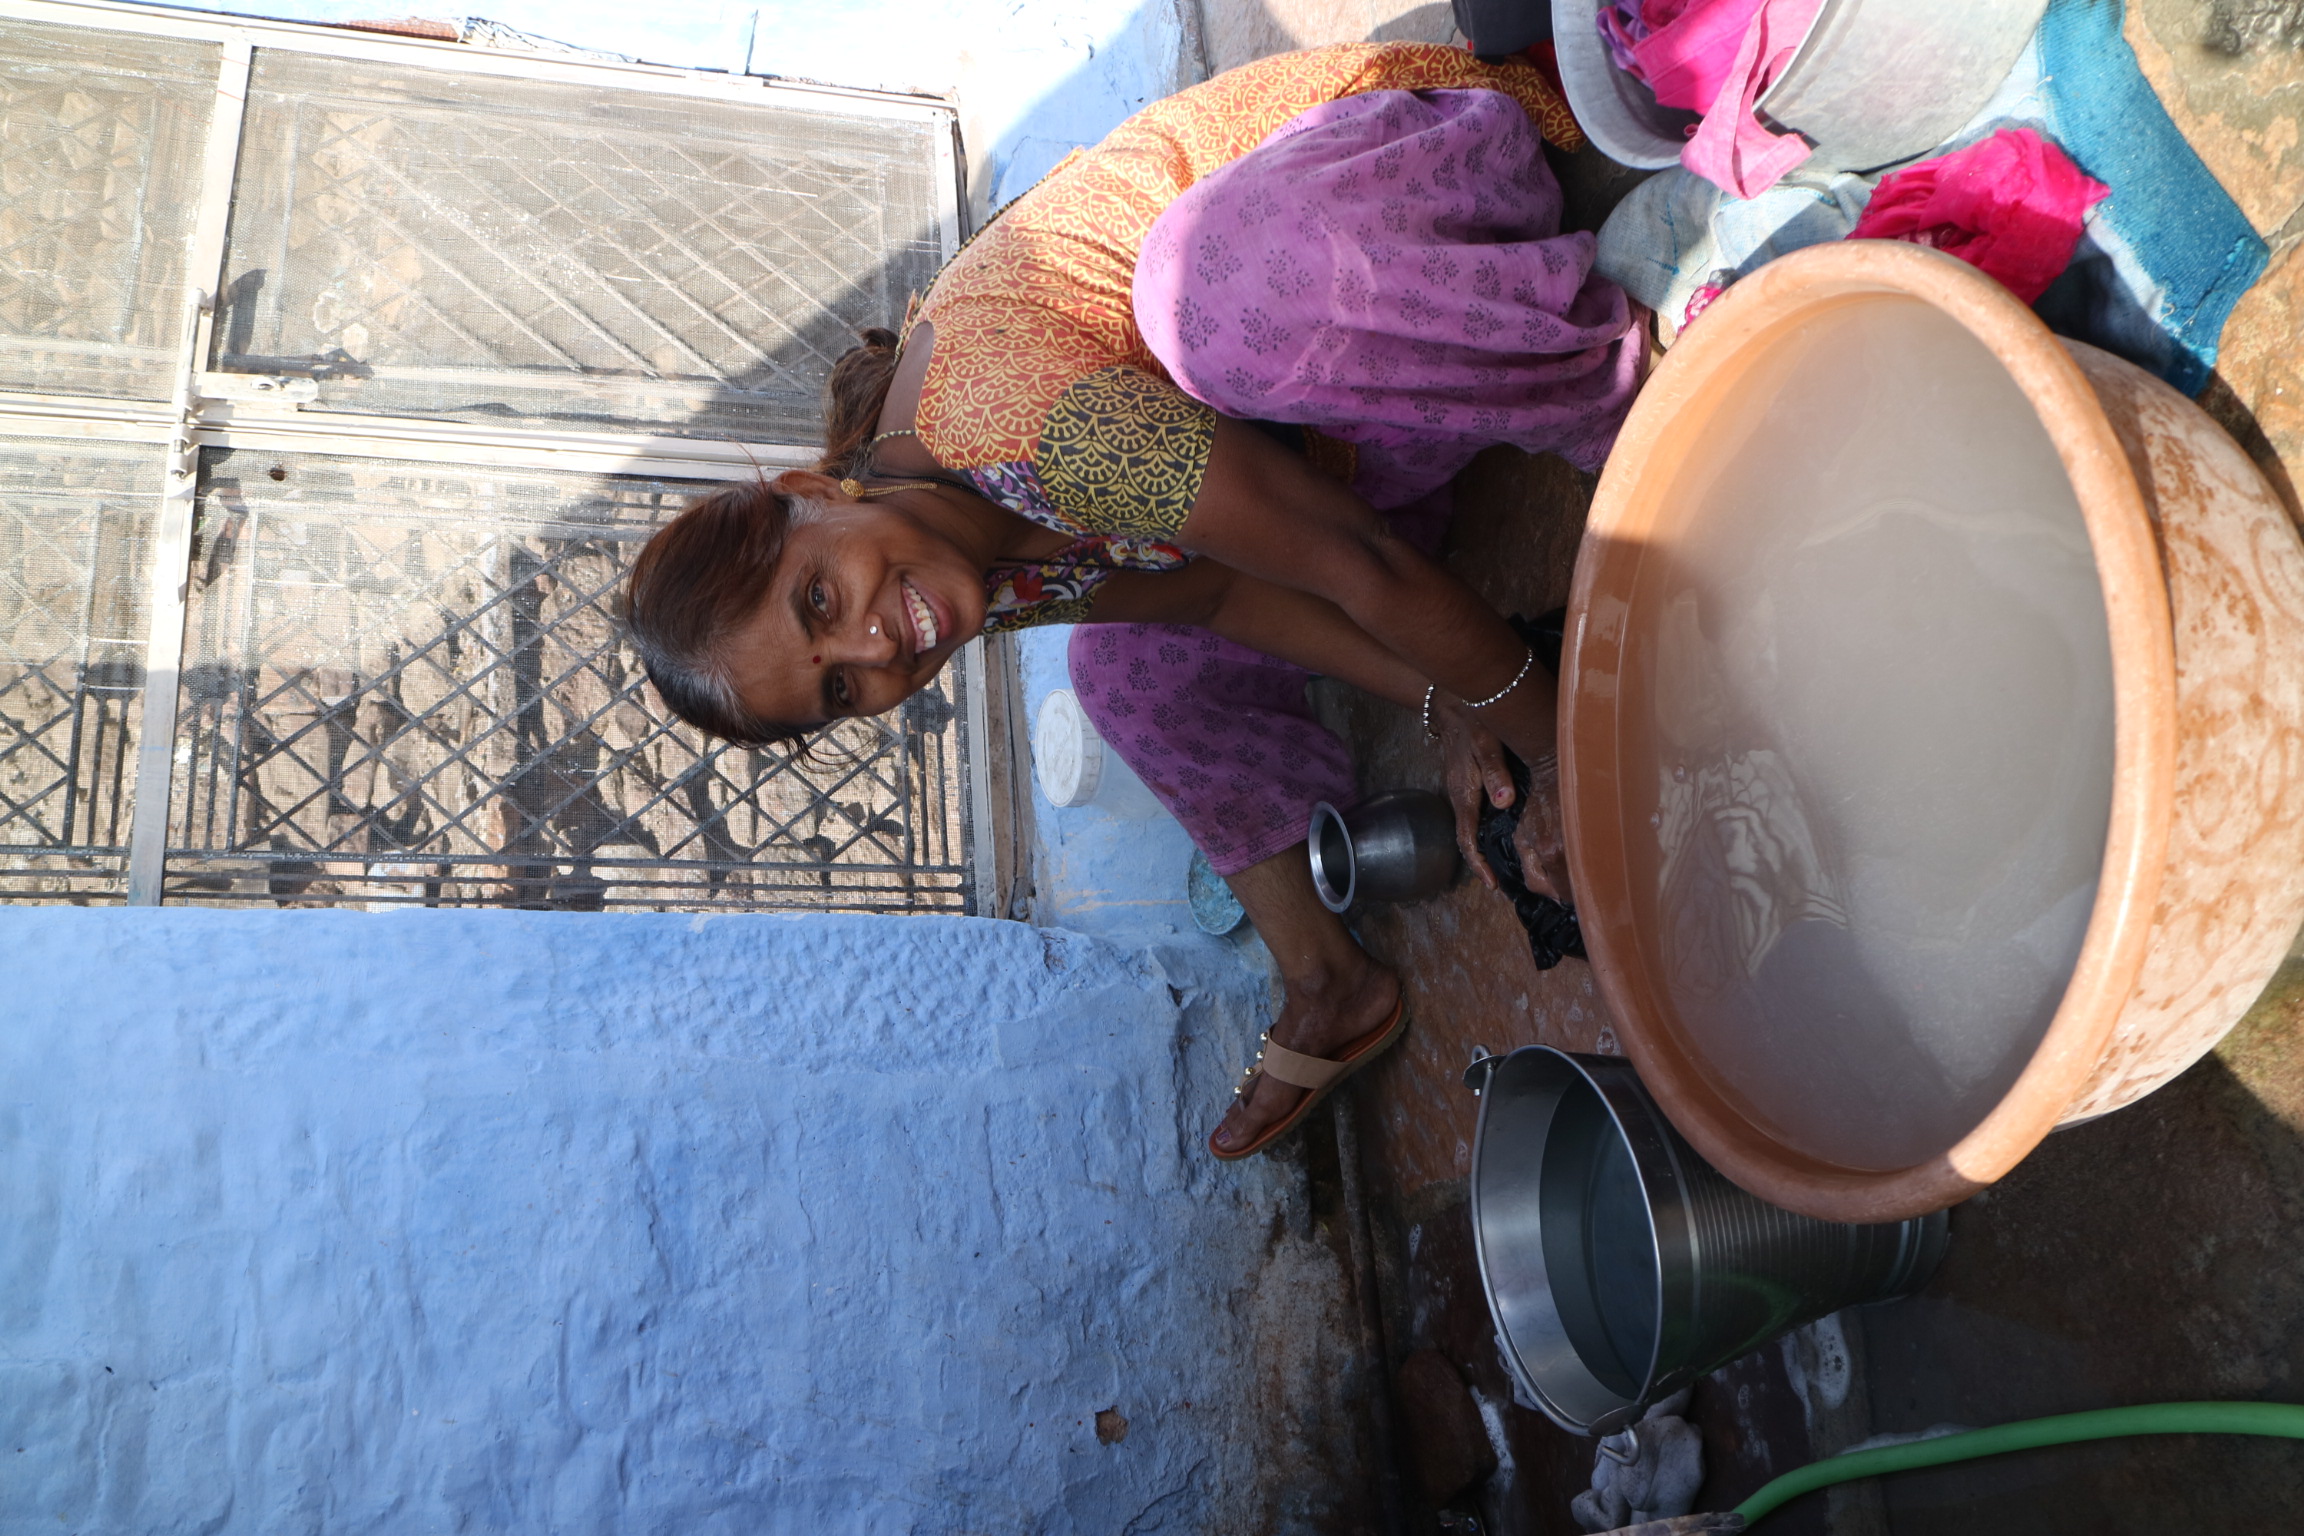 Undertaking laundry day in the heat of the Rajasthan desert, Jodhpur. Finding shade is scarce yet smiles everywhere. 